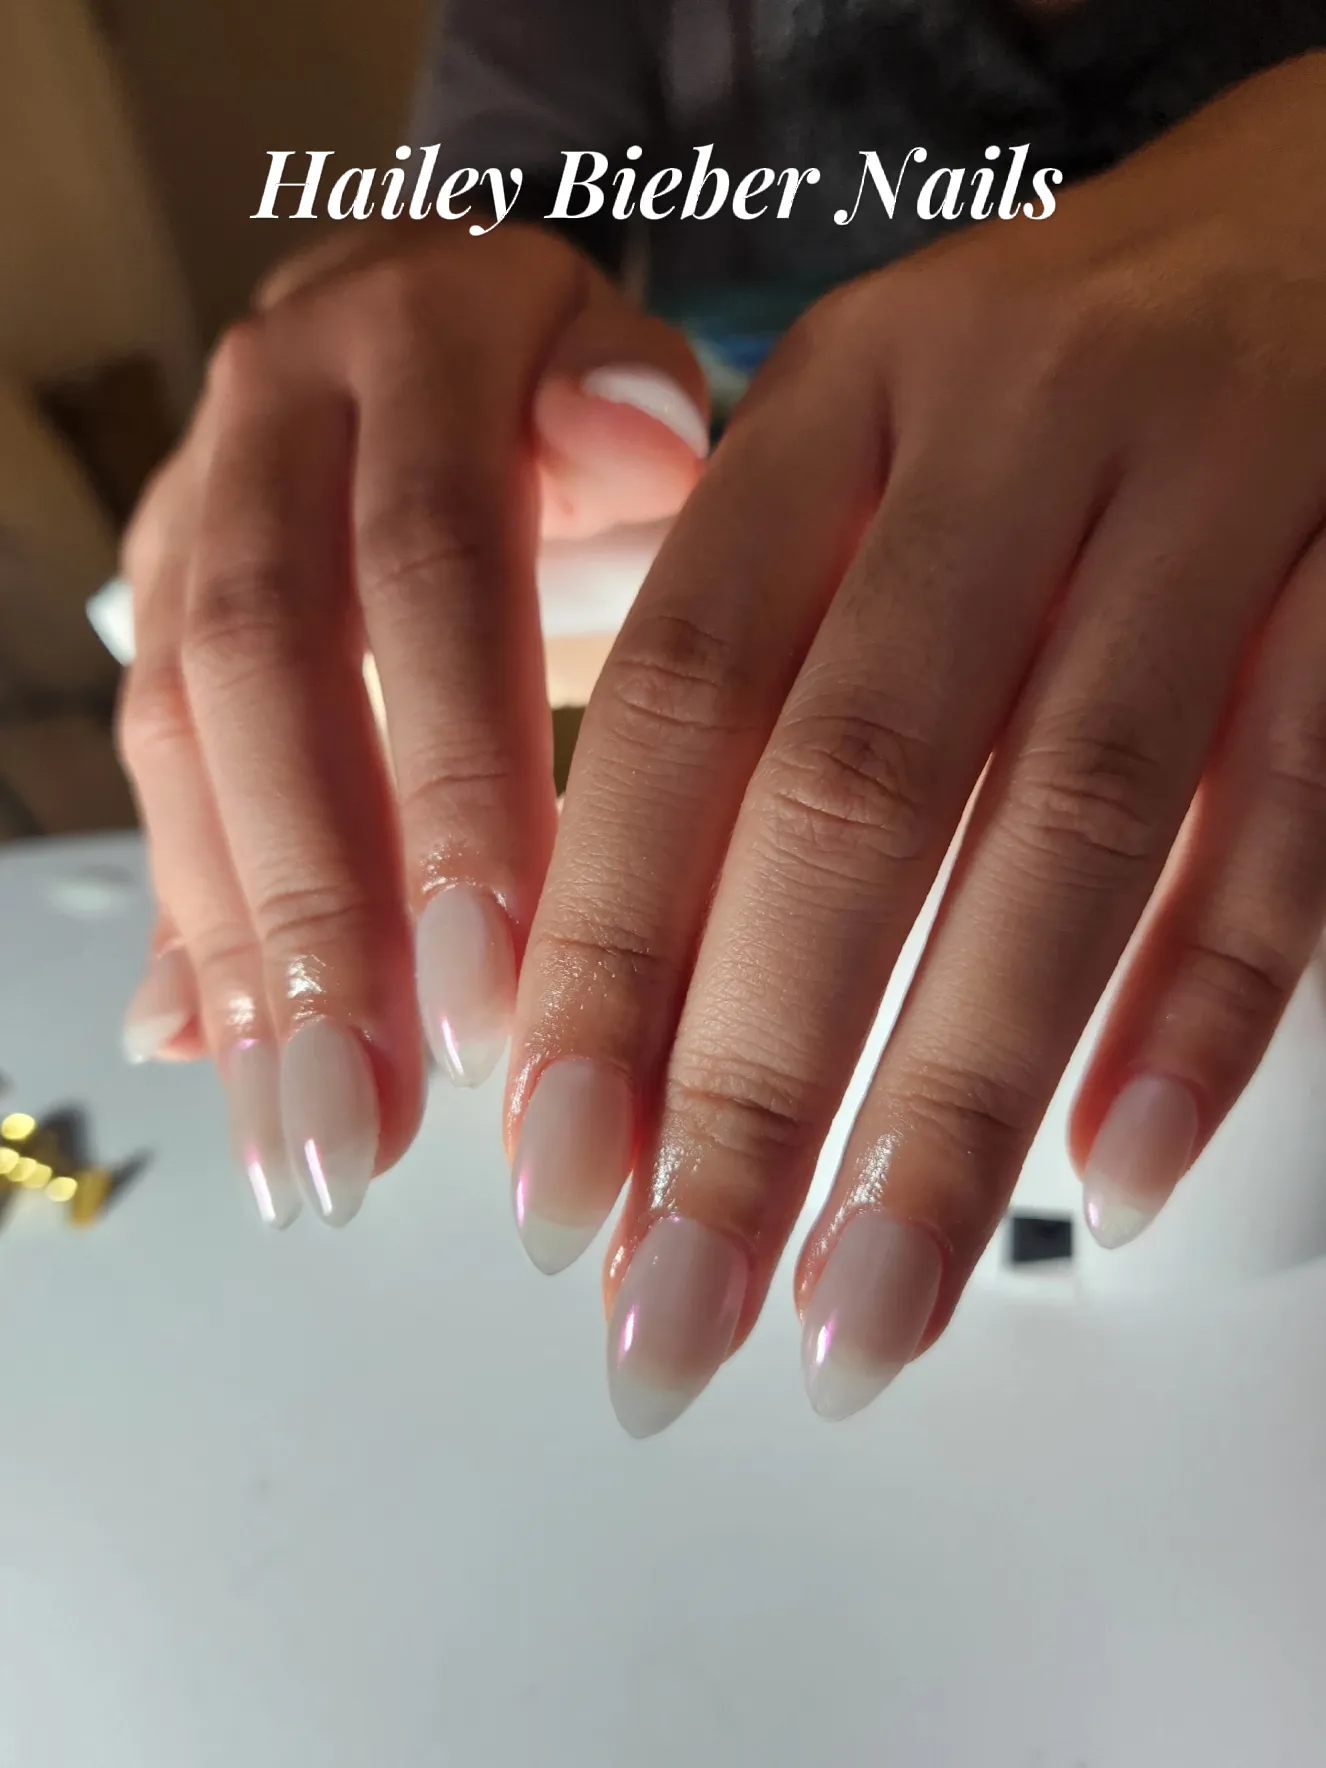 $16 hailey bieber's inspired pearl nails